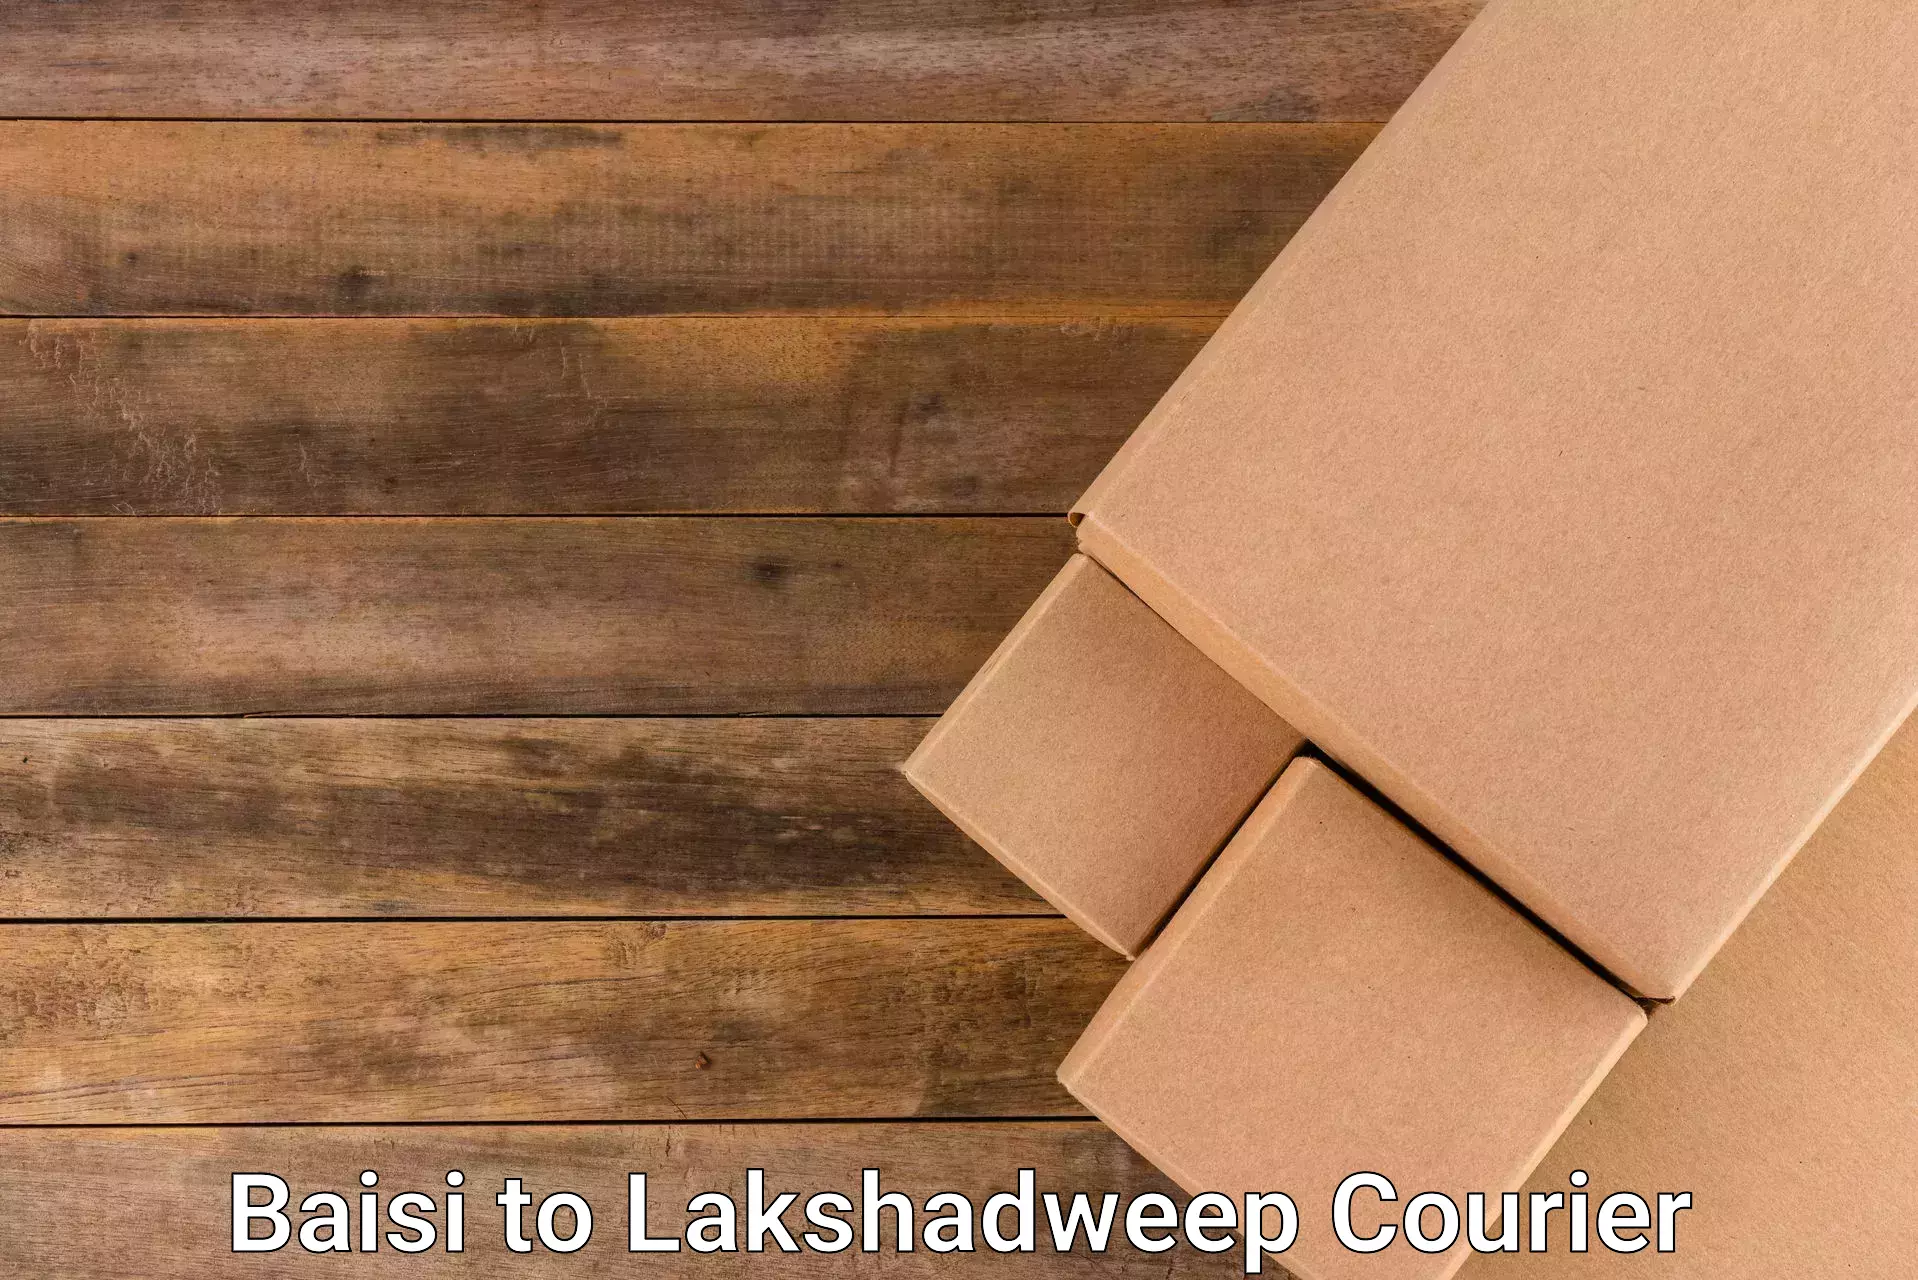 Express courier capabilities Baisi to Lakshadweep